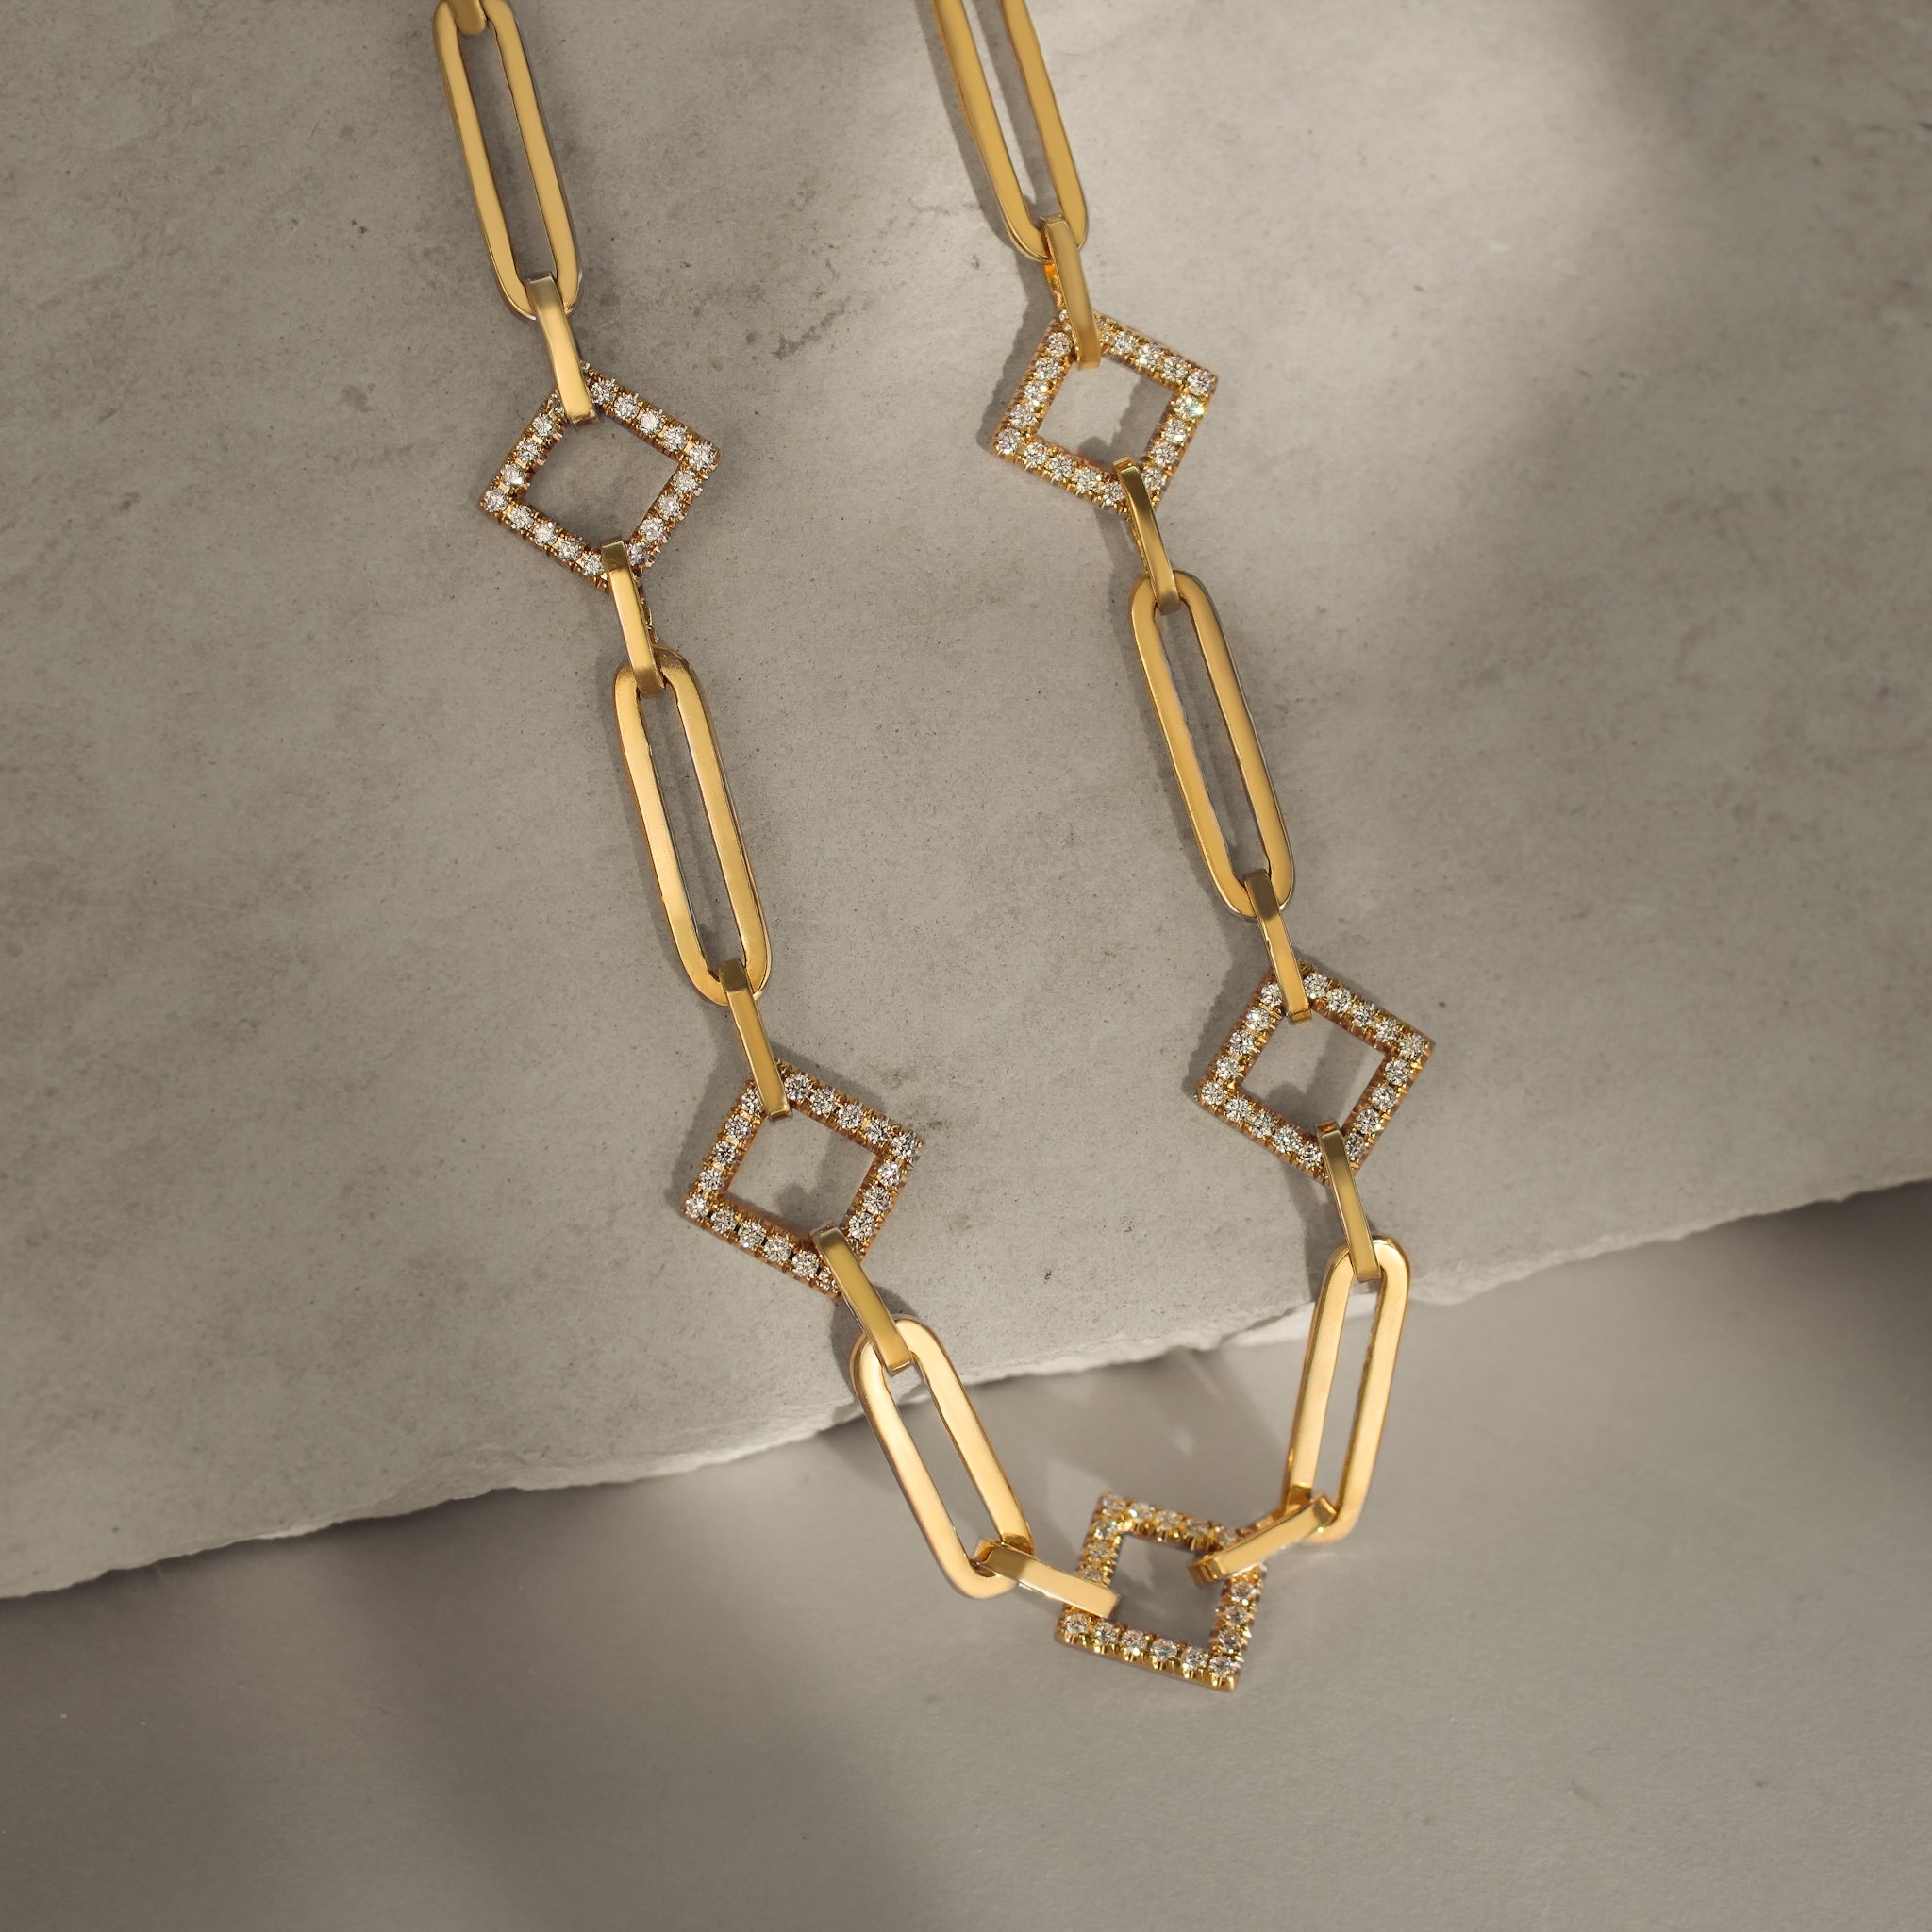 14k yellow gold chain with a mix of square links with diamonds and cable style links alternating small and large